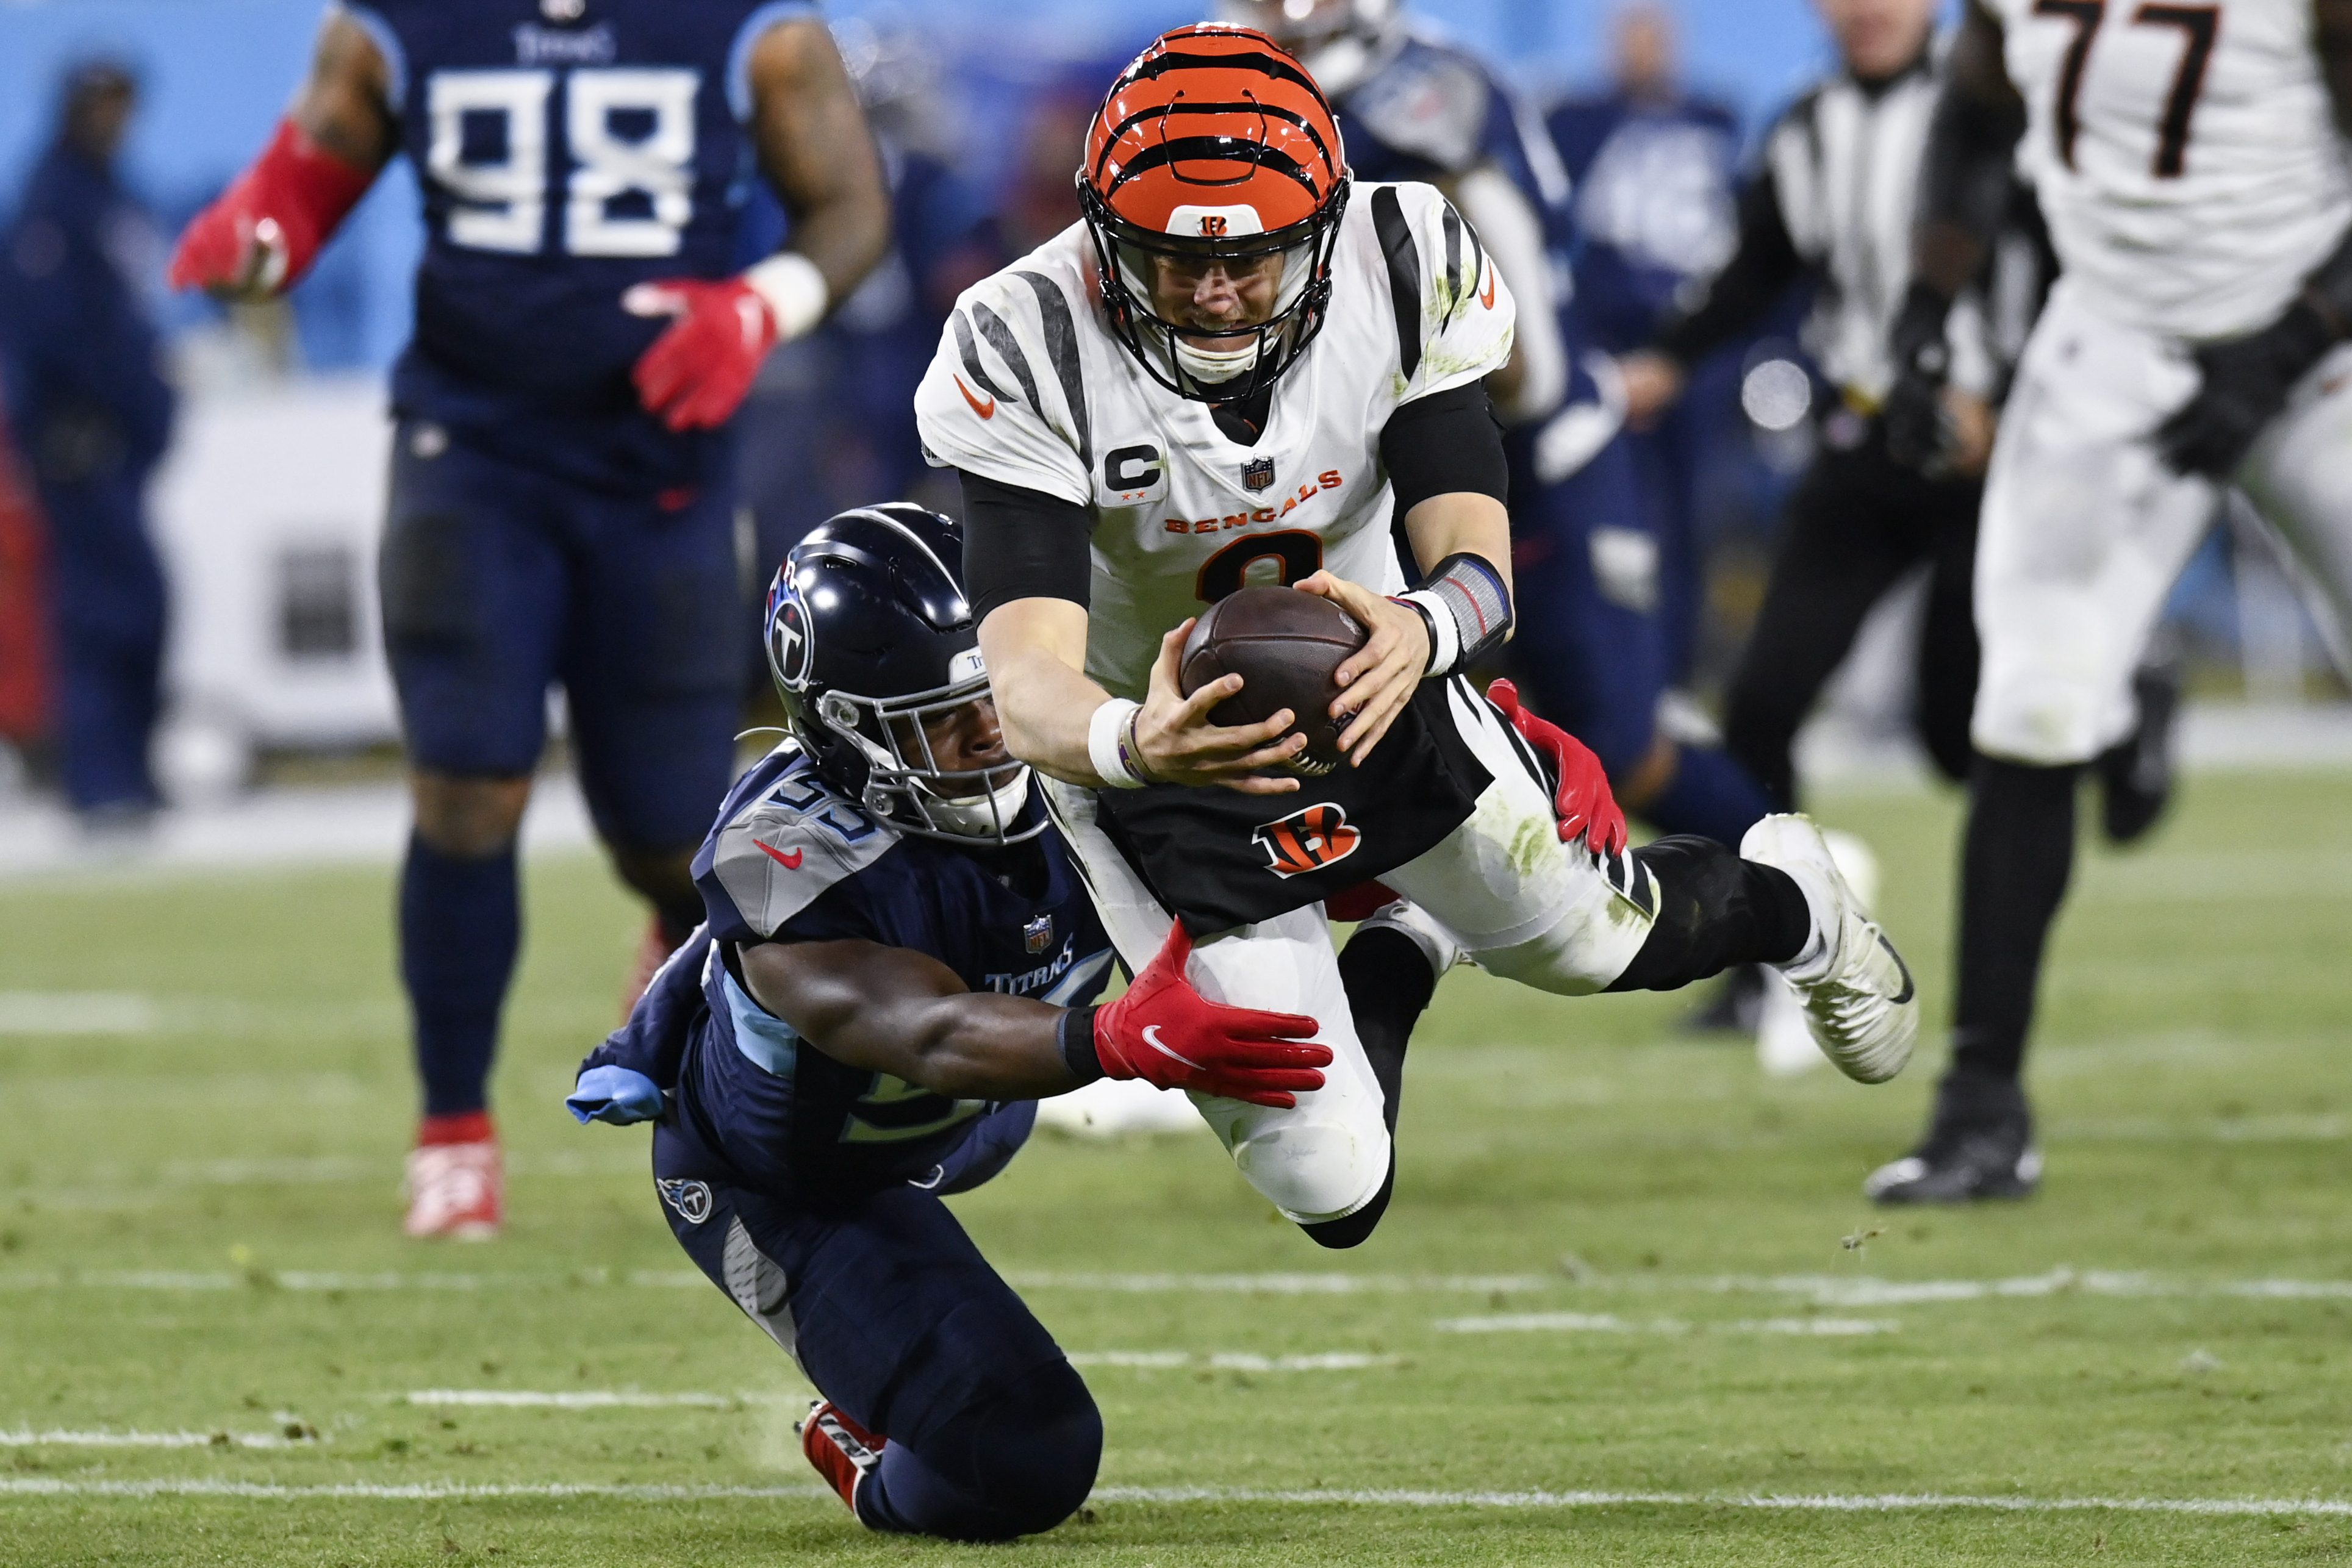 Bengals defeat Bills, advance to AFC Championship Game to face